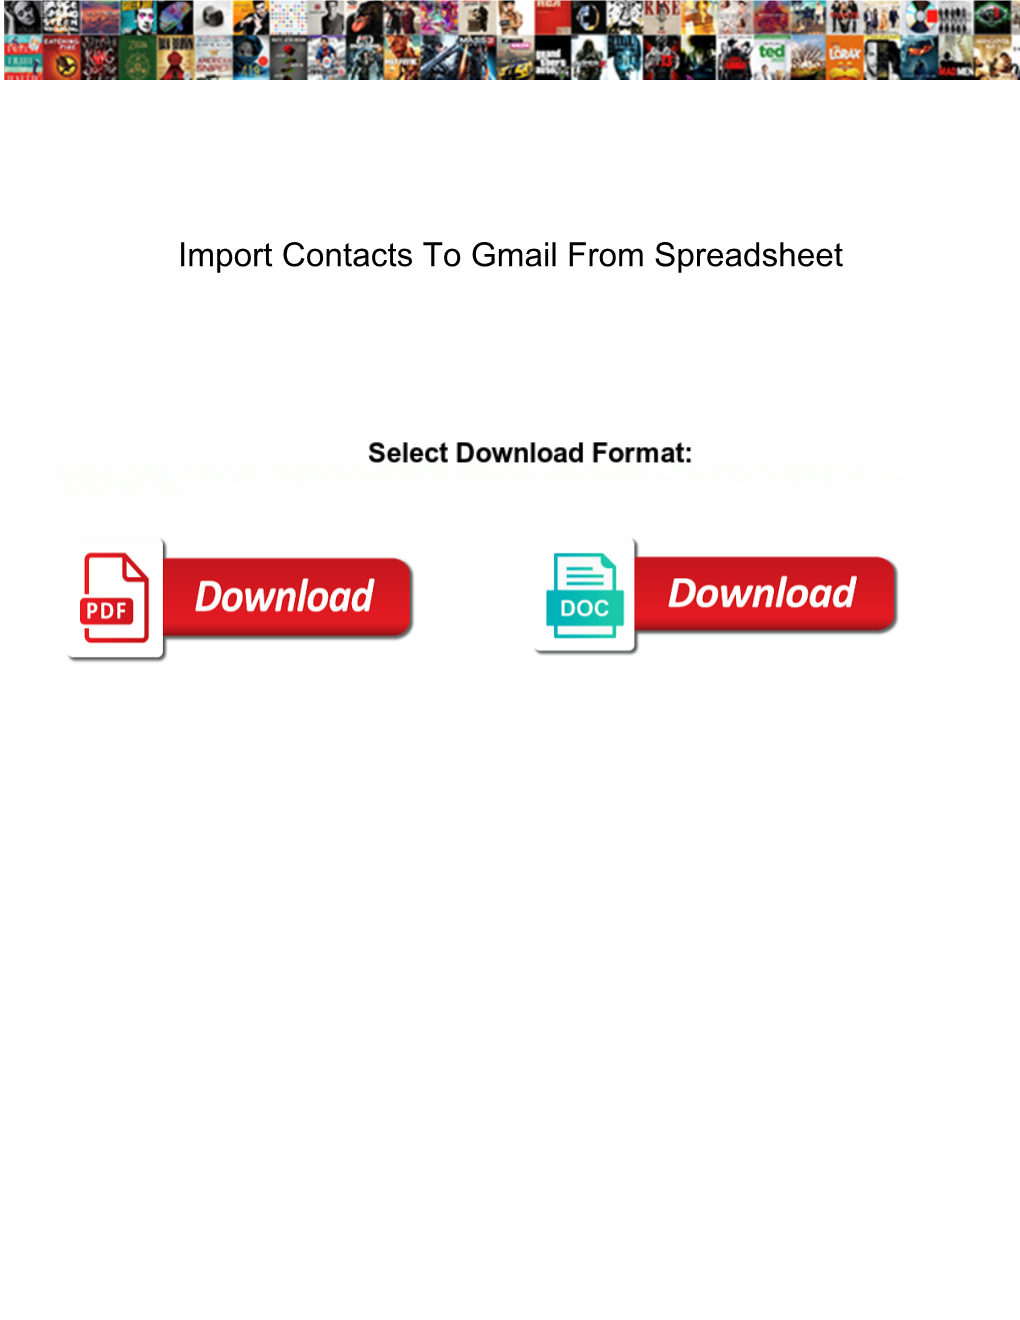 Import Contacts to Gmail from Spreadsheet